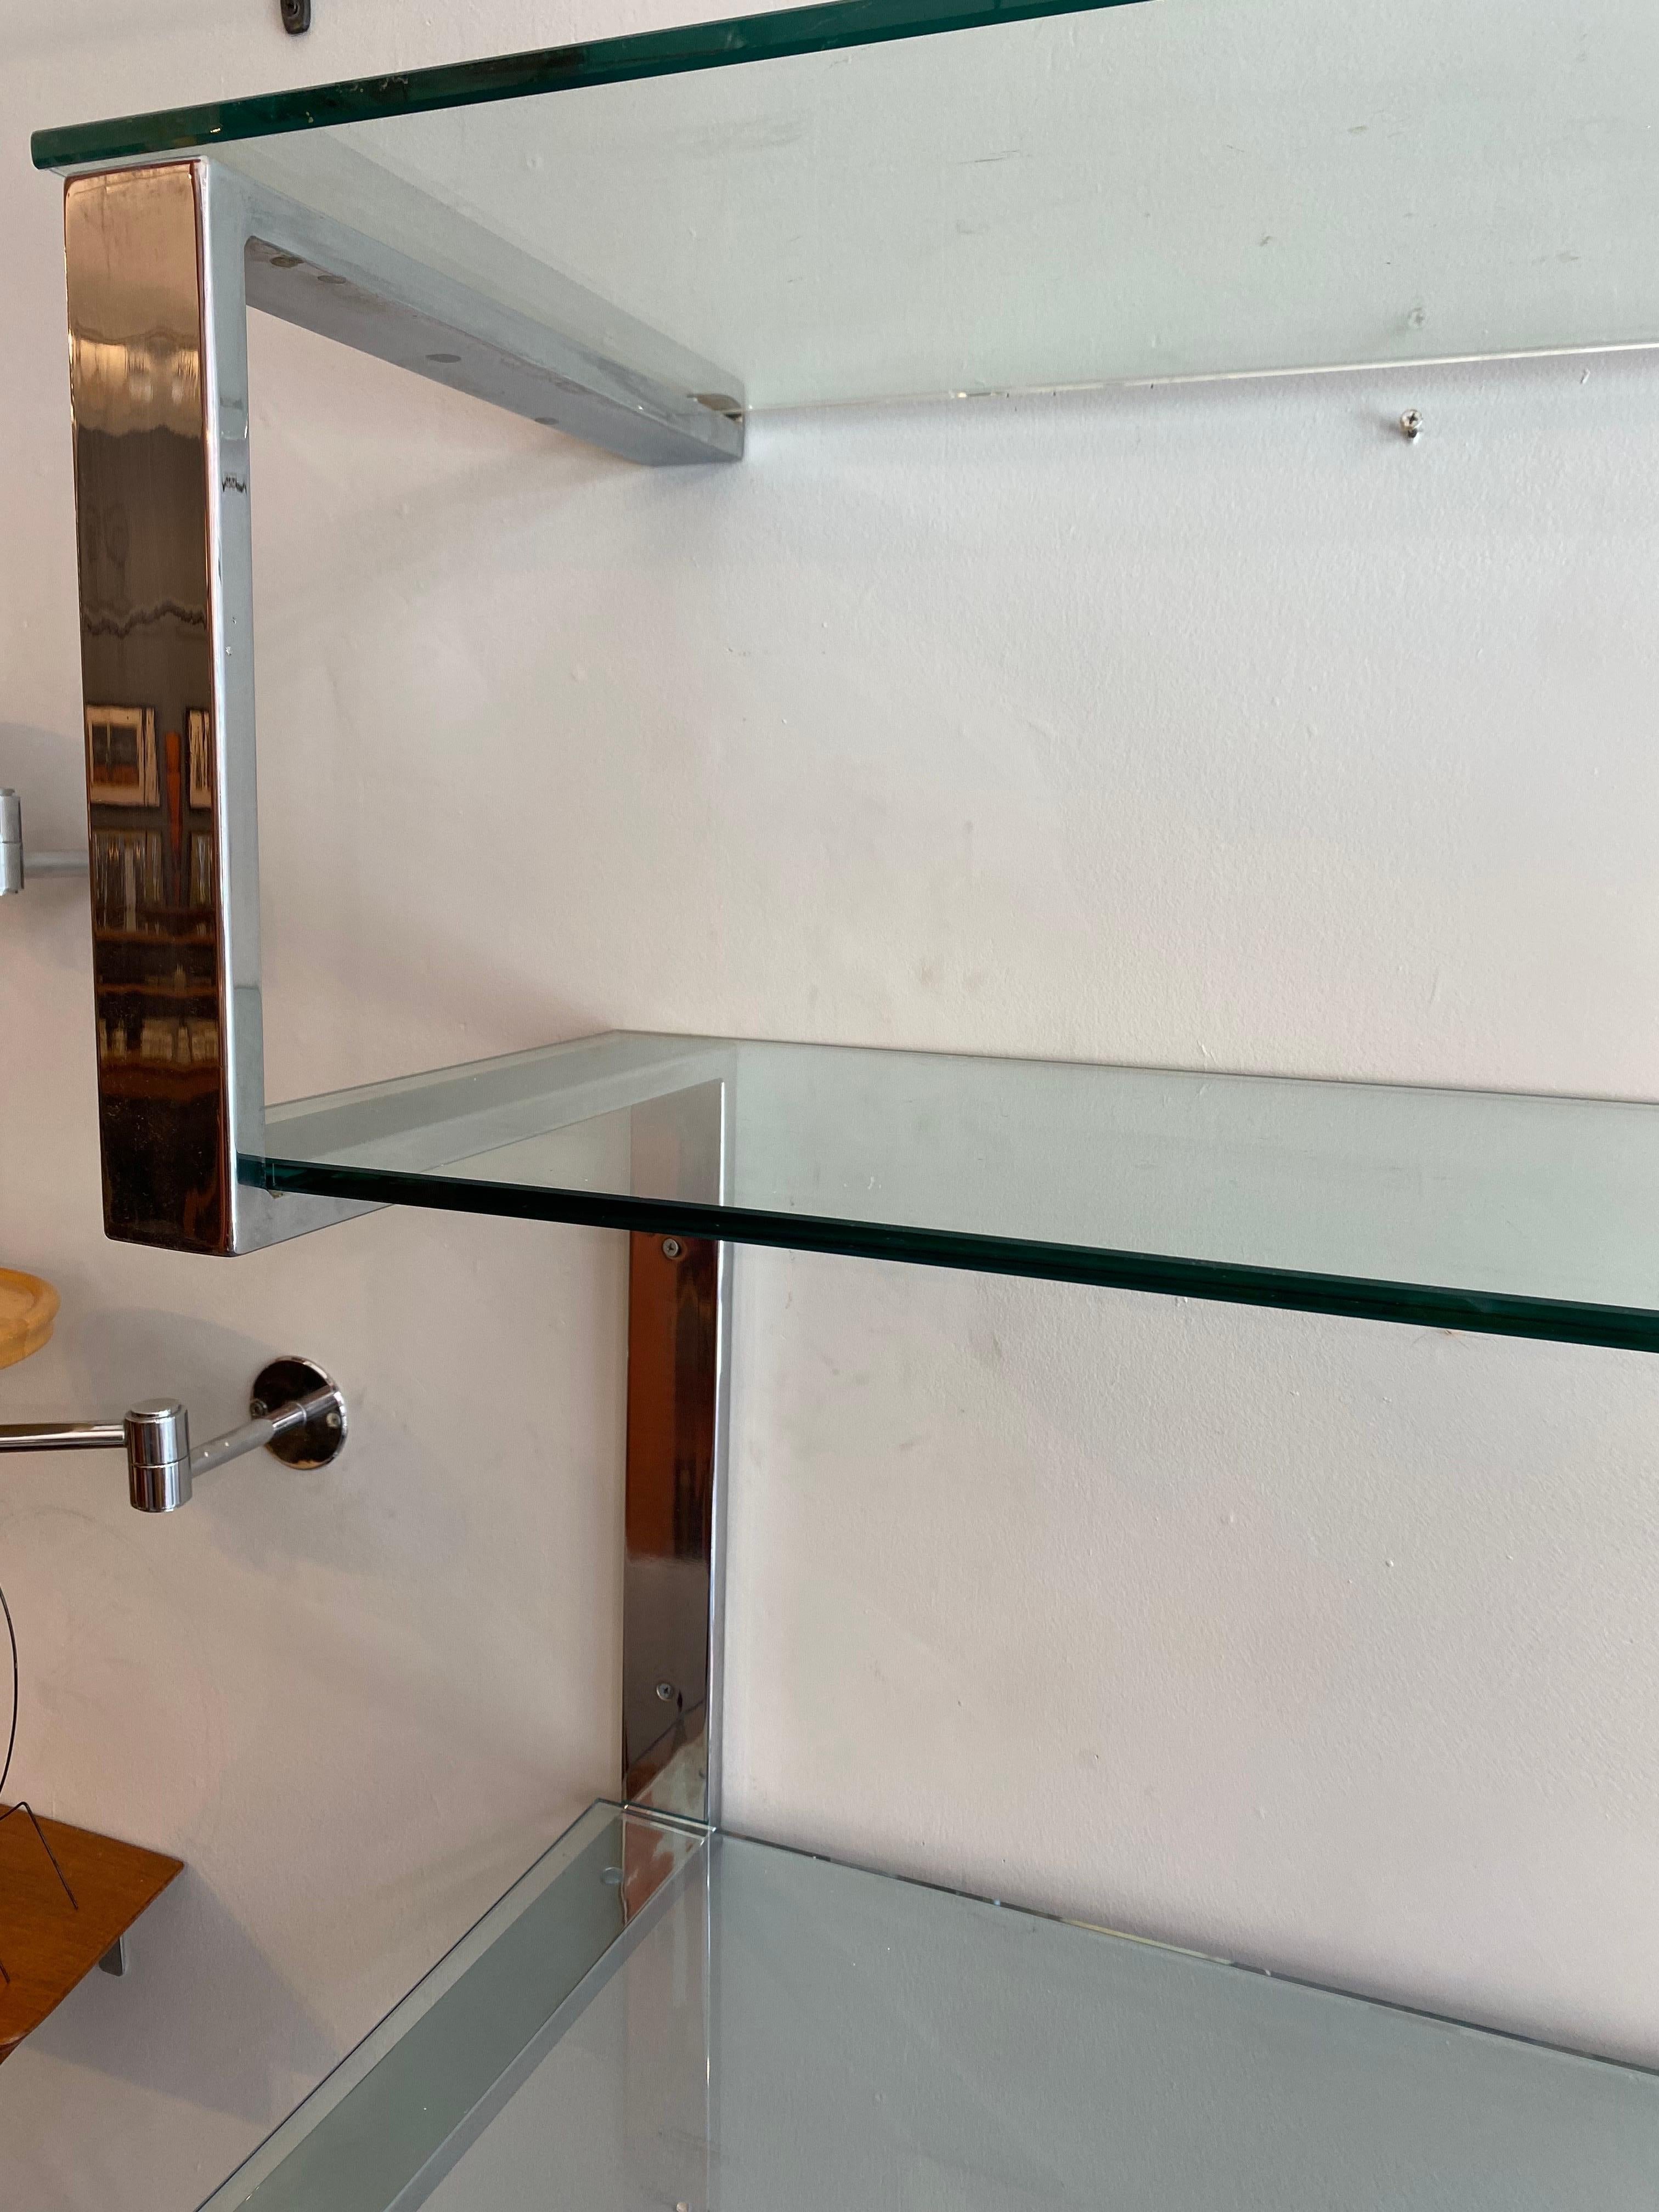 Tri-Mark Chrome and Glass Shelf from the mid 1970's.  Zig-Zag design mounts easily to a wall and is very solid!  Overall very clean, one glass shelf has a chip to rear edge and a little plating loss on some of the flat areas under the glass as seen